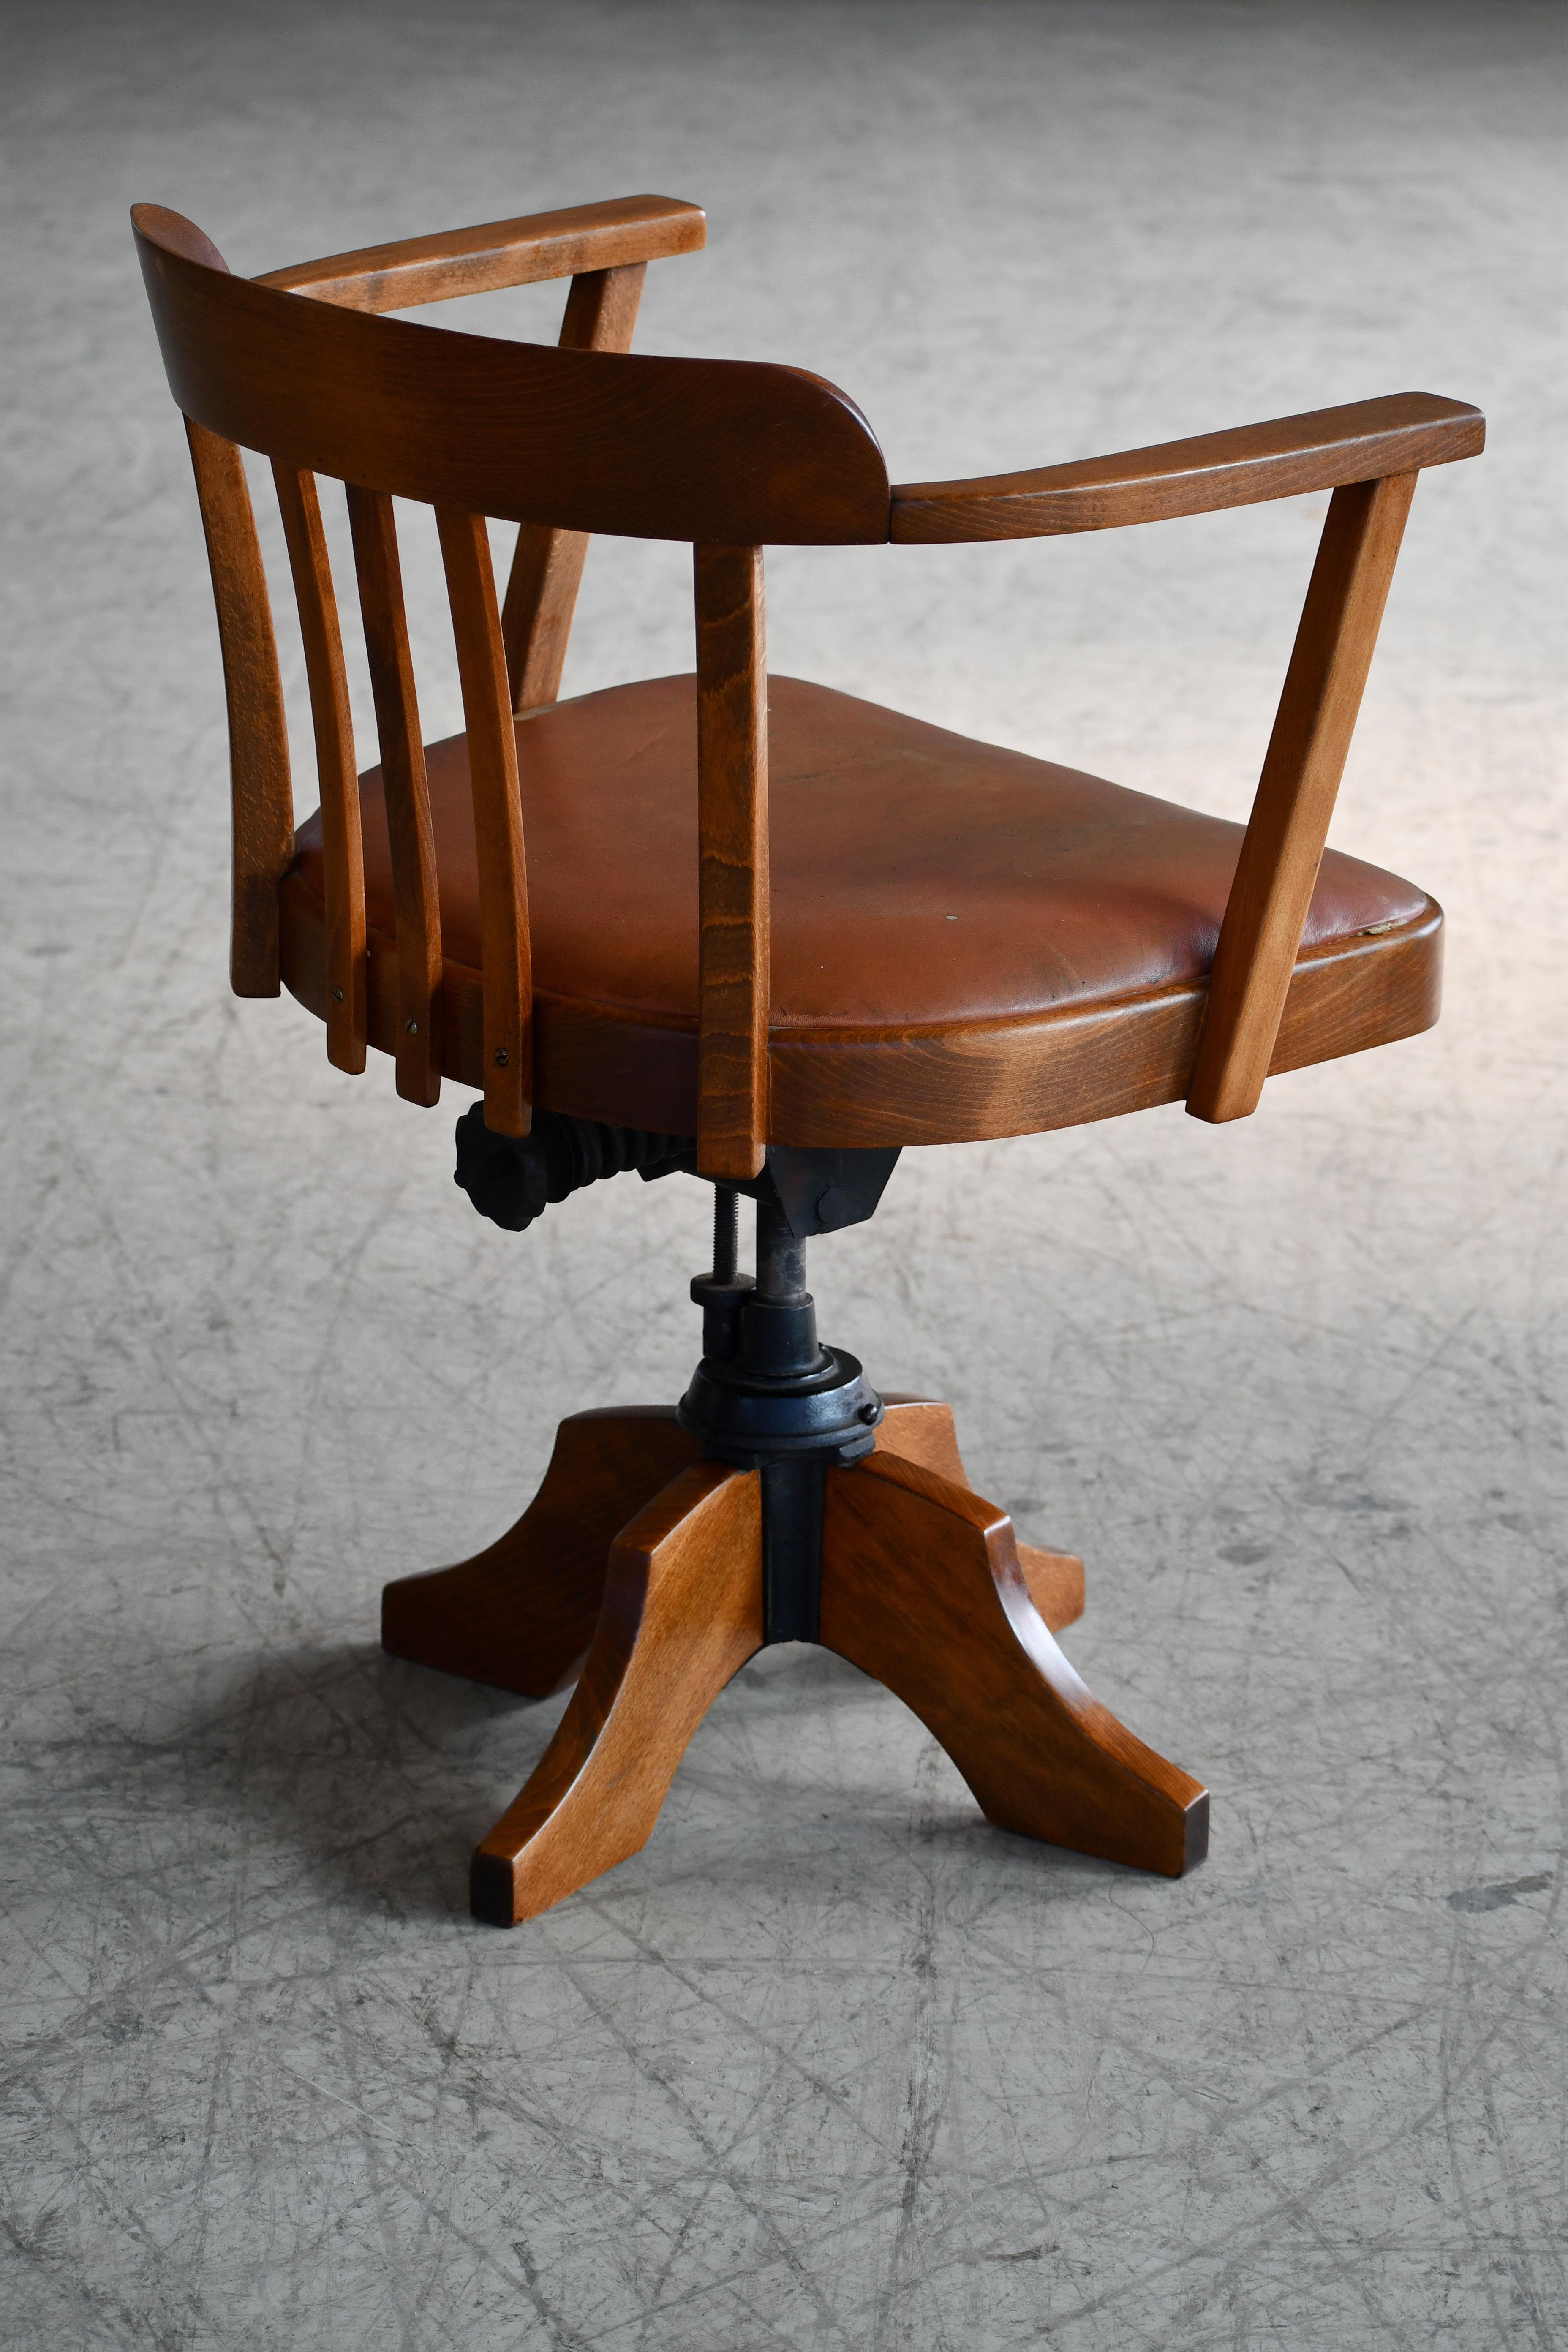 Danish 1920s Swivel Desk Chair in Solid Oak with Leather Seat 1